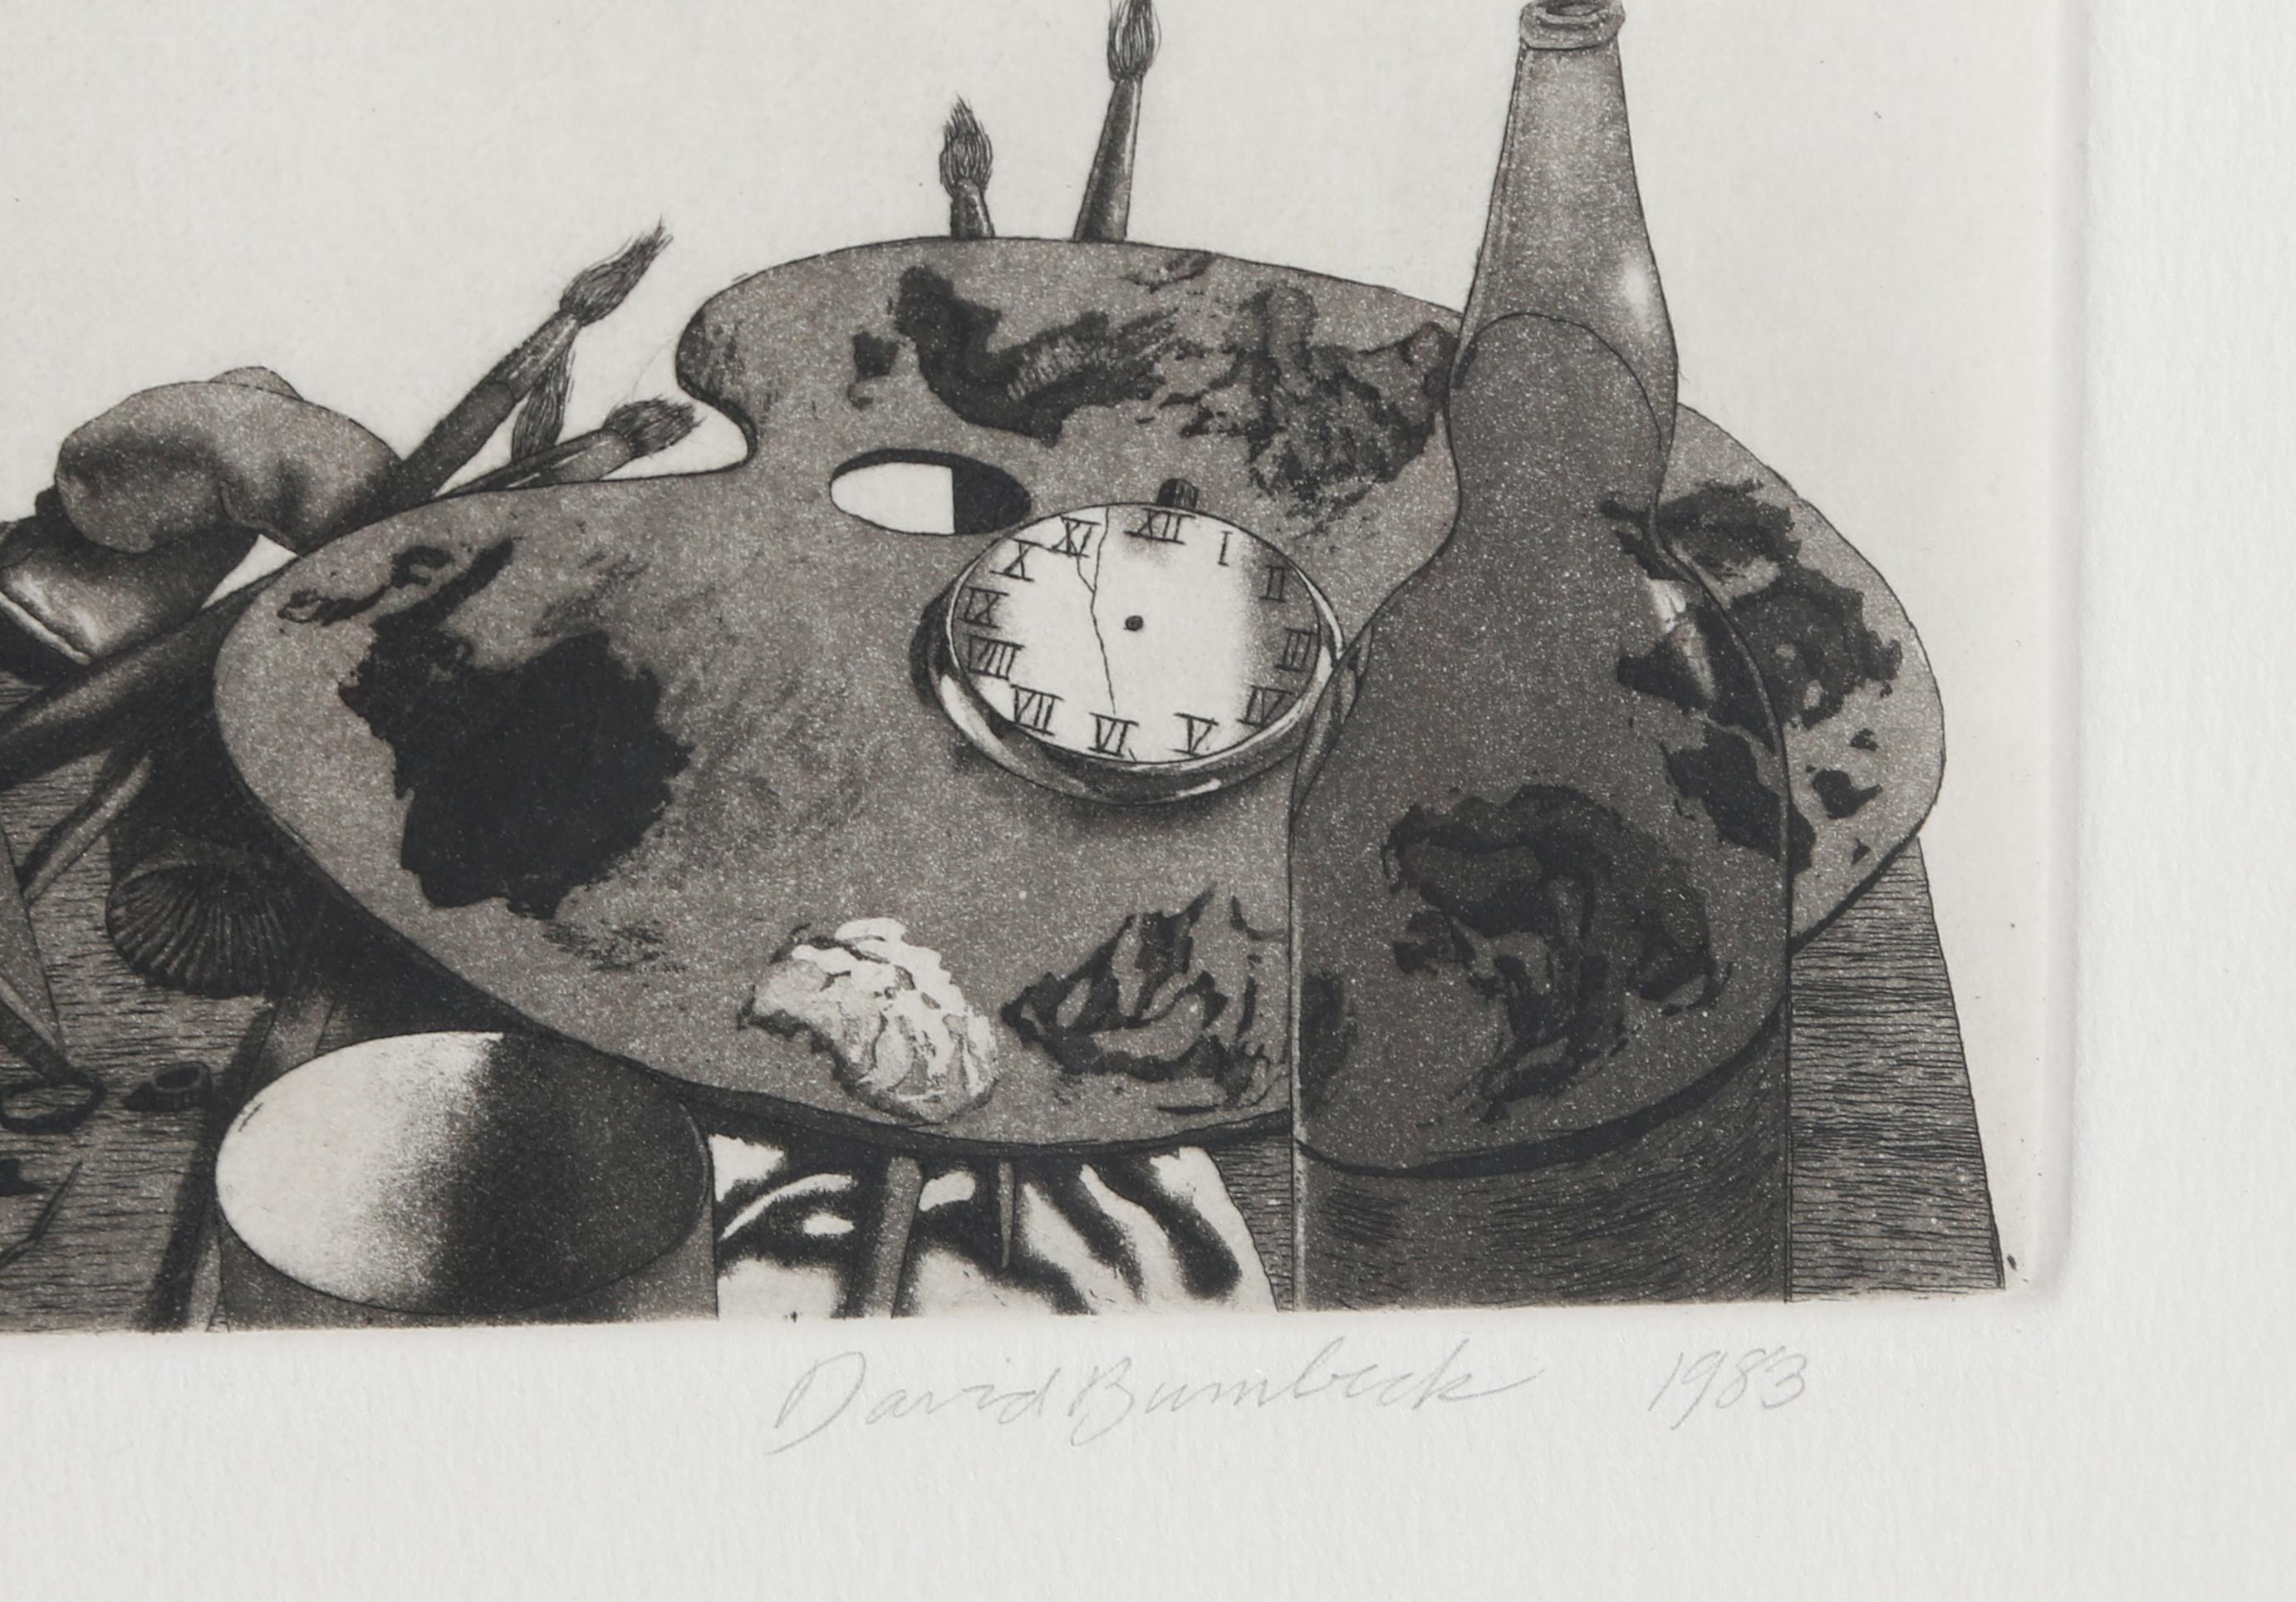 Gauguin
David Bumbeck, American (1940)
Date: 1983
Etching, signed, numbered, dated, and titled in pencil
Edition of 41/100
Image Size: 14.5 x 17.5 inches
Size: 19 x 22 in. (48.26 x 55.88 cm)
Frame Size: 23 x 26 inches